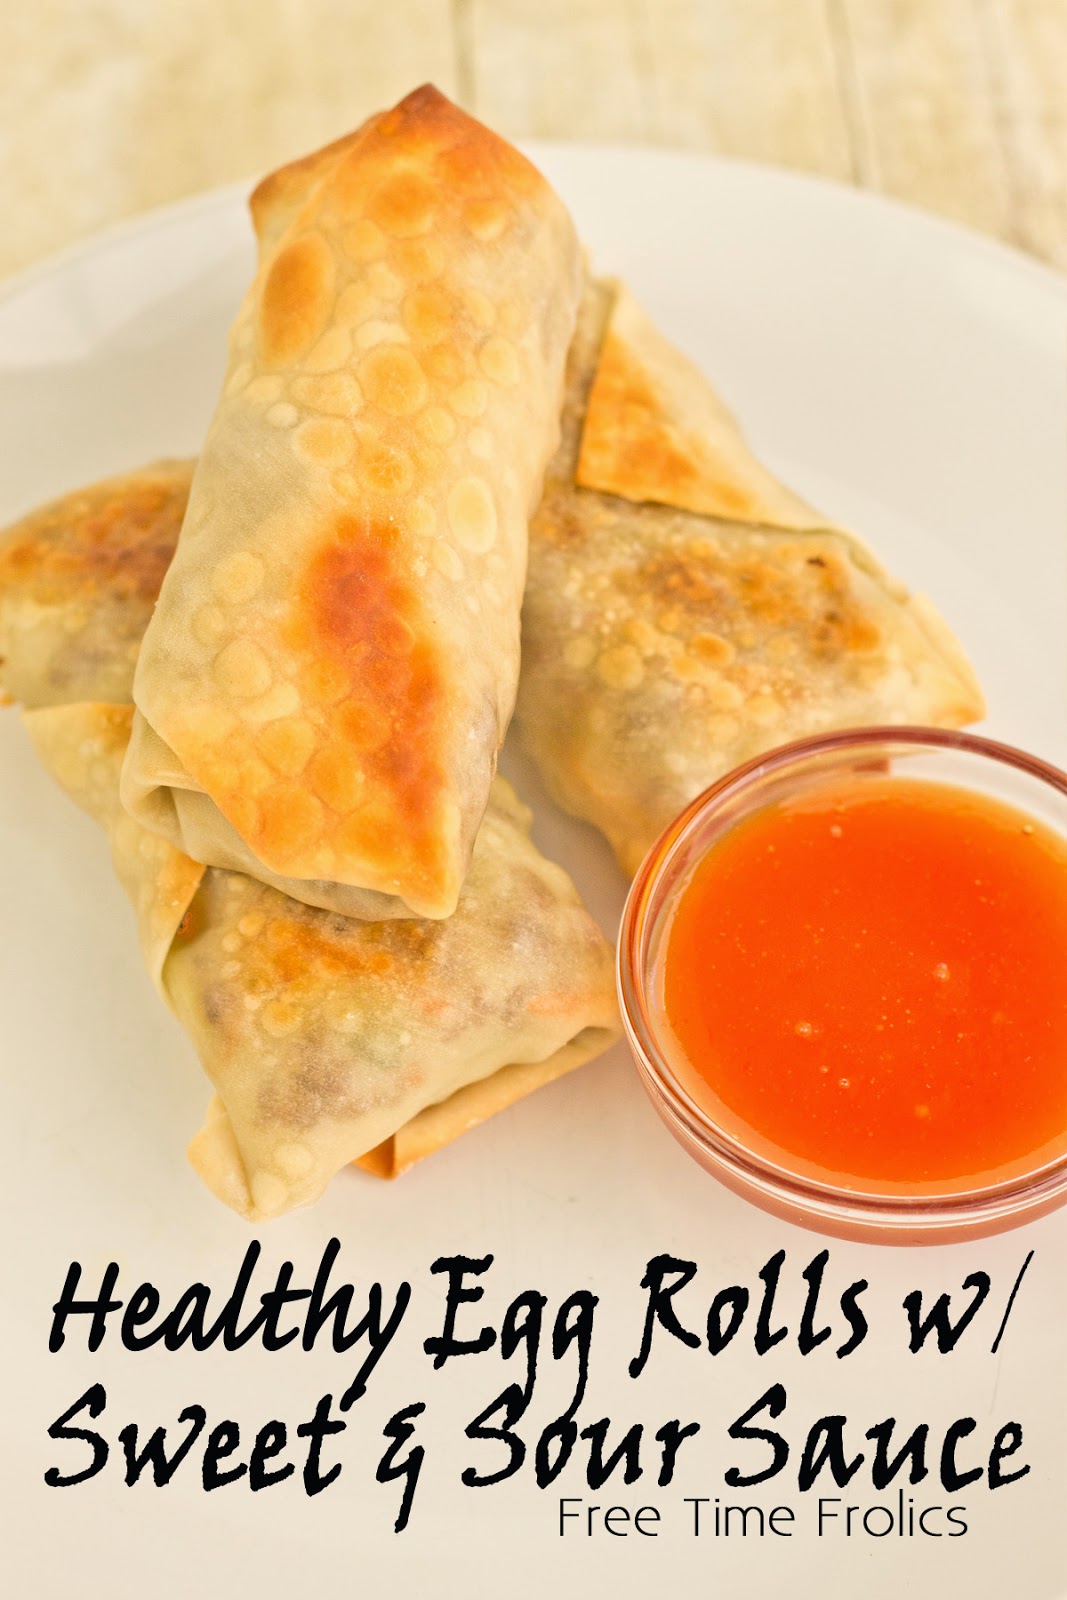 Healthy Homemade Baked Egg Rolls with Sweet and Sour Sauce www.freetimefrolics.com